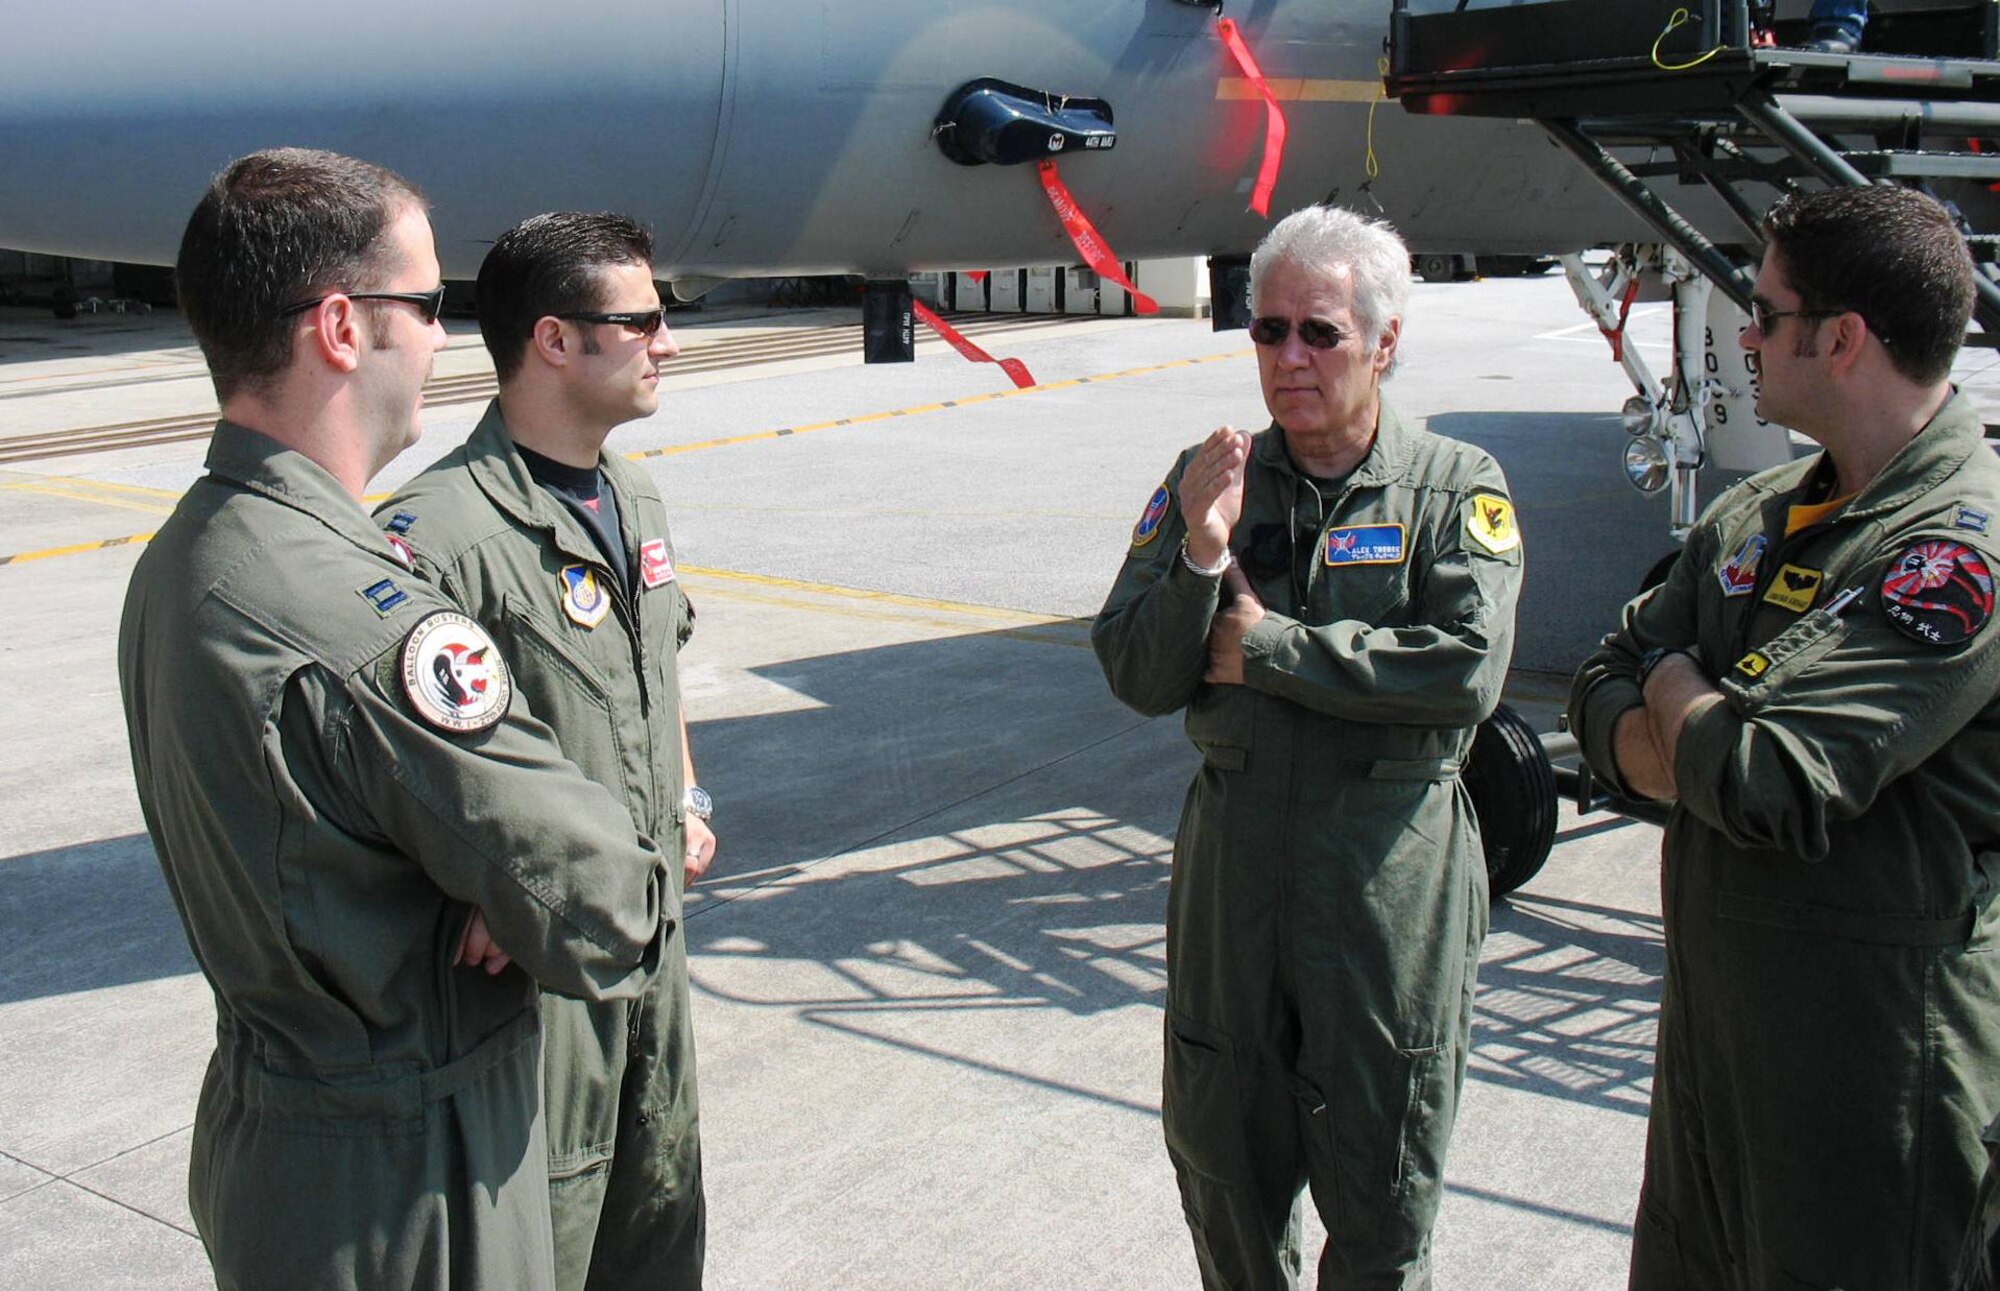 KADENA AIR BASE, Japan -- Alex Trebek, host of the Jeopardy game show, talks to U.S. Air Force fighter pilots at Kadena March 31 during a Jeopardy game show USO tour of Japan.  Speaking with Mr. Trebek are (from left) Capt. Phil Colomy, F-22 pilot with the 27th Fighter Squadron, Langley Air Force Base, Va.; Capt. Kirby Enser, F-15 pilot with the 67th Fighter Squadron, Kadena Air Base; and Capt. Jonathan Airhart, also an F-22 pilot with the 27th Fighter Squadron.  The two Langley pilots are here on the F-22 stealth fighter's first overseas deployment.  During the Jeopardy show's two-day trip to Kadena, Mr. Trebek and show staff also toured an F-22, a KC-135 Stratotanker, an E-3 AWACS (Airborne Warning and Control System), an F-15C fighter, and an HH-60 helicopter.  The F-22 is temporarily based at Kadena on its first overseas deployment from Langley Air Force Base, Va.  Kadena residents were allowed to try-out to be contestants on Jeopardy, as well.  (Air Force/Senior Master Sgt. Kenneth Fidler)